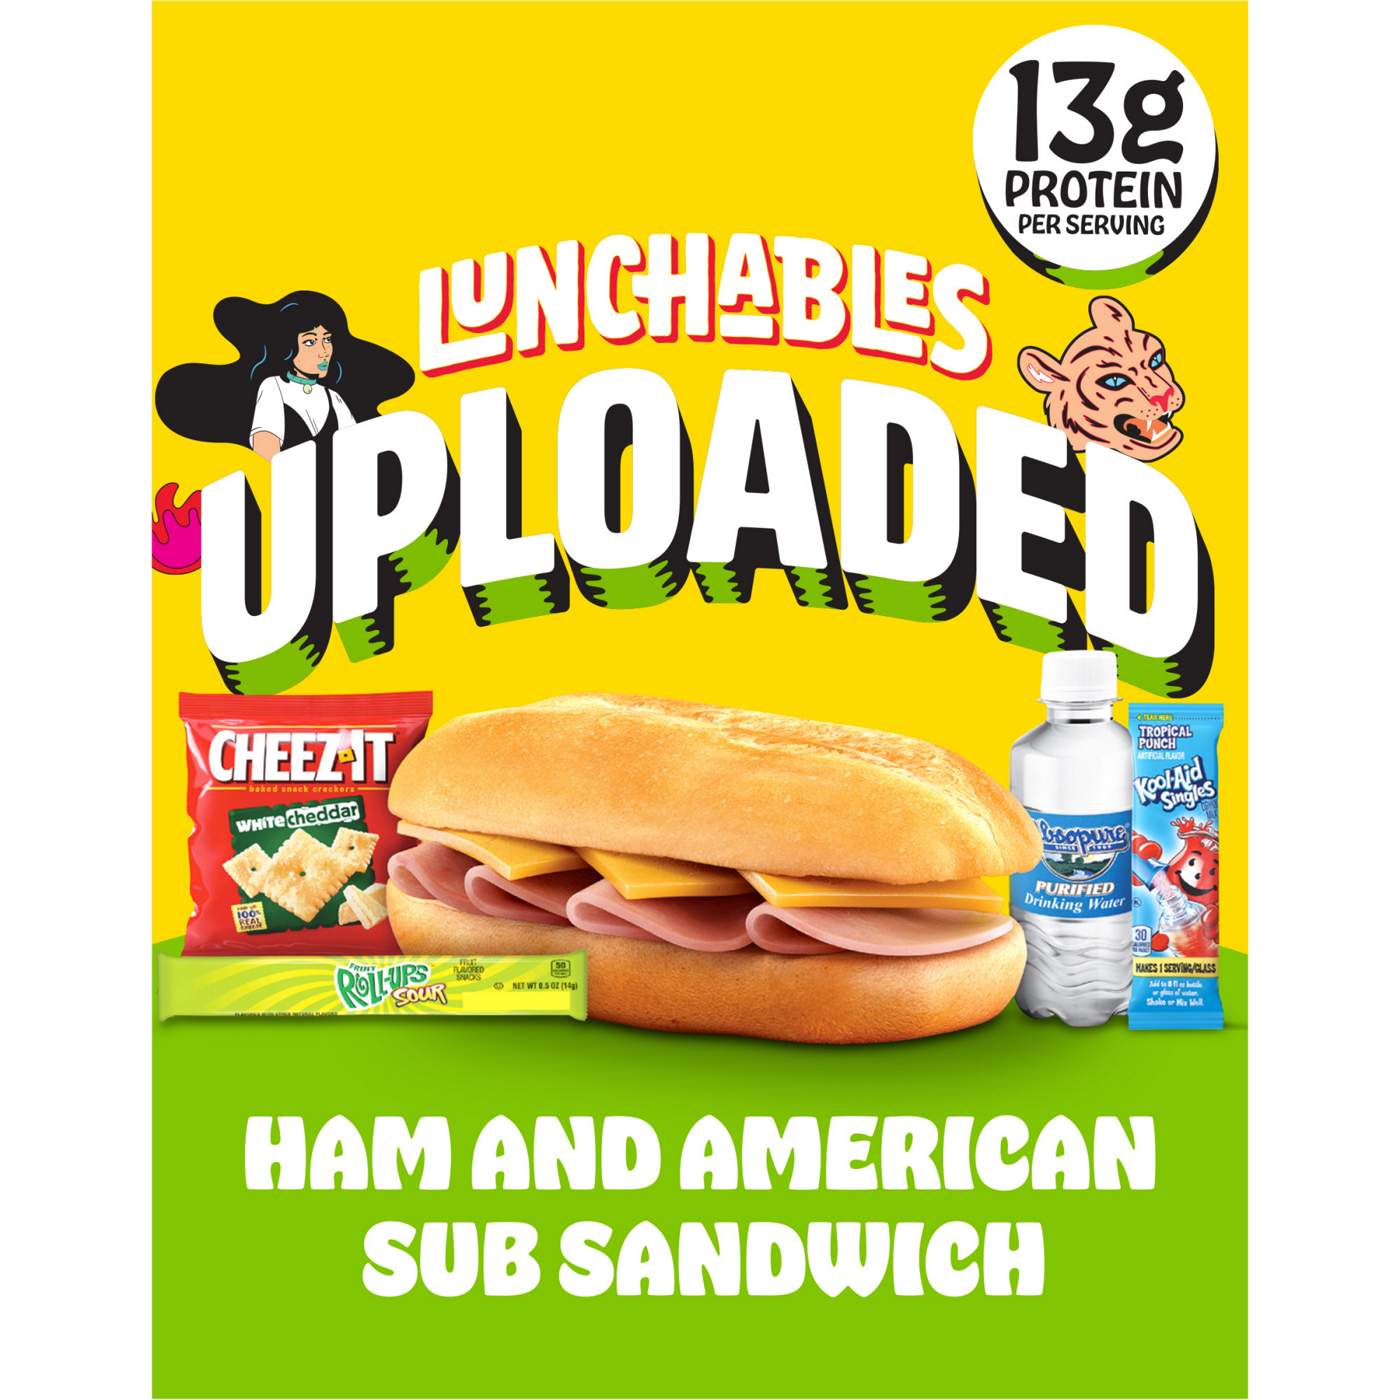 Lunchables Uploaded Meal Kit - Ham & American Sub Sandwich; image 1 of 5